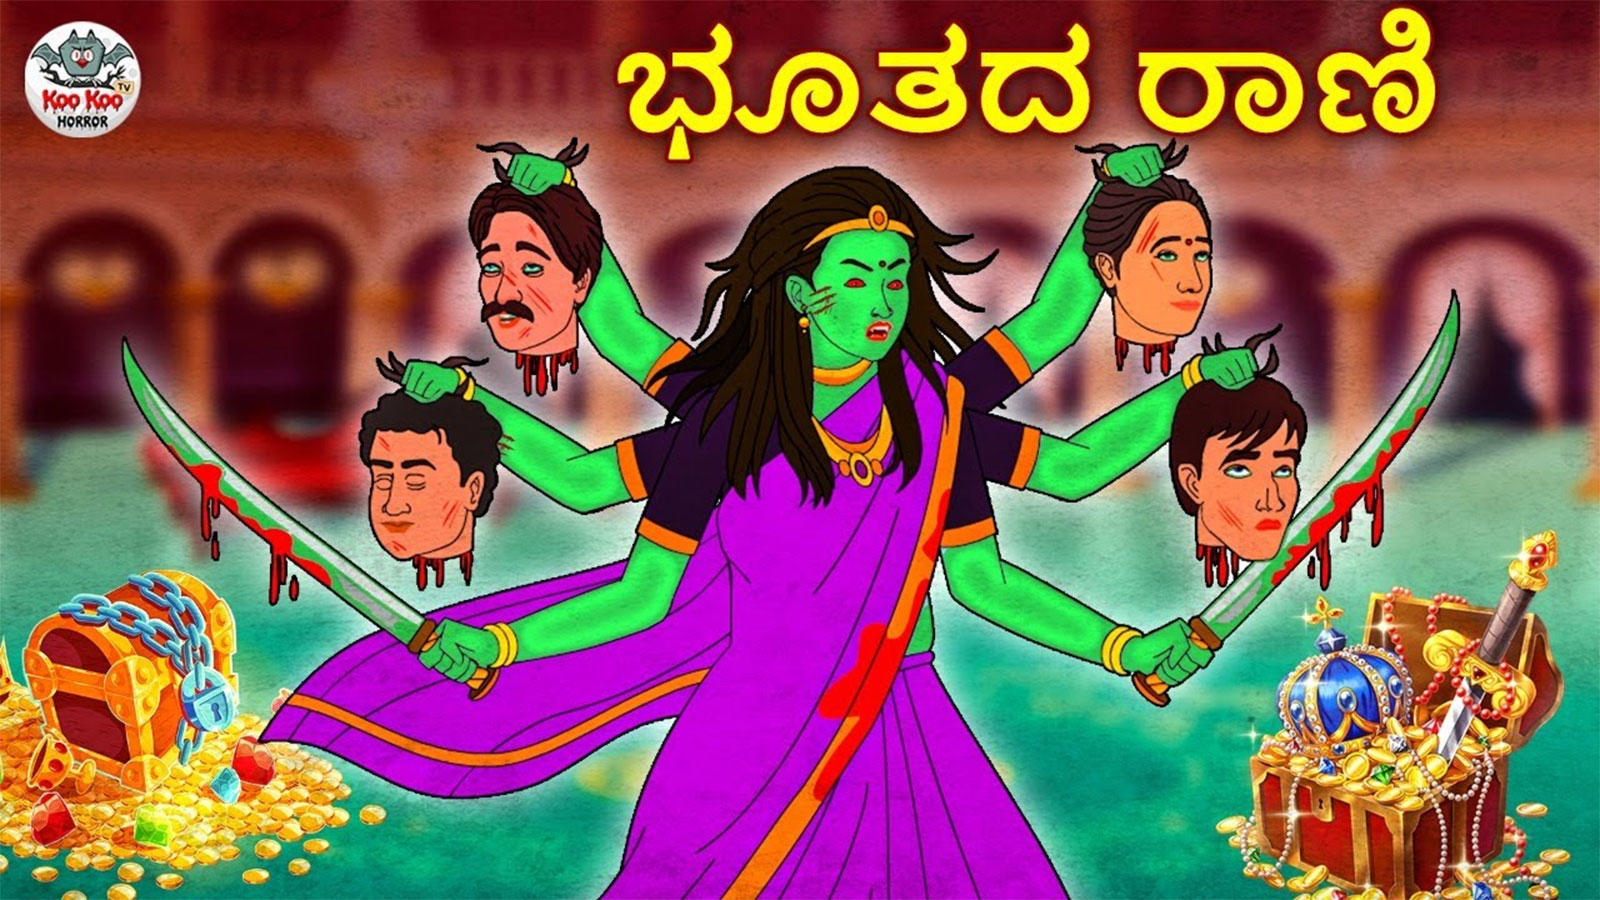 Check Out Latest Kids Kannada Nursery Horror Story 'ಭೂತದ ರಾಣಿ - The Haunted  Queen' for Kids - Watch Children's Nursery Stories, Baby Songs, Fairy Tales  In Kannada | Entertainment - Times of India Videos